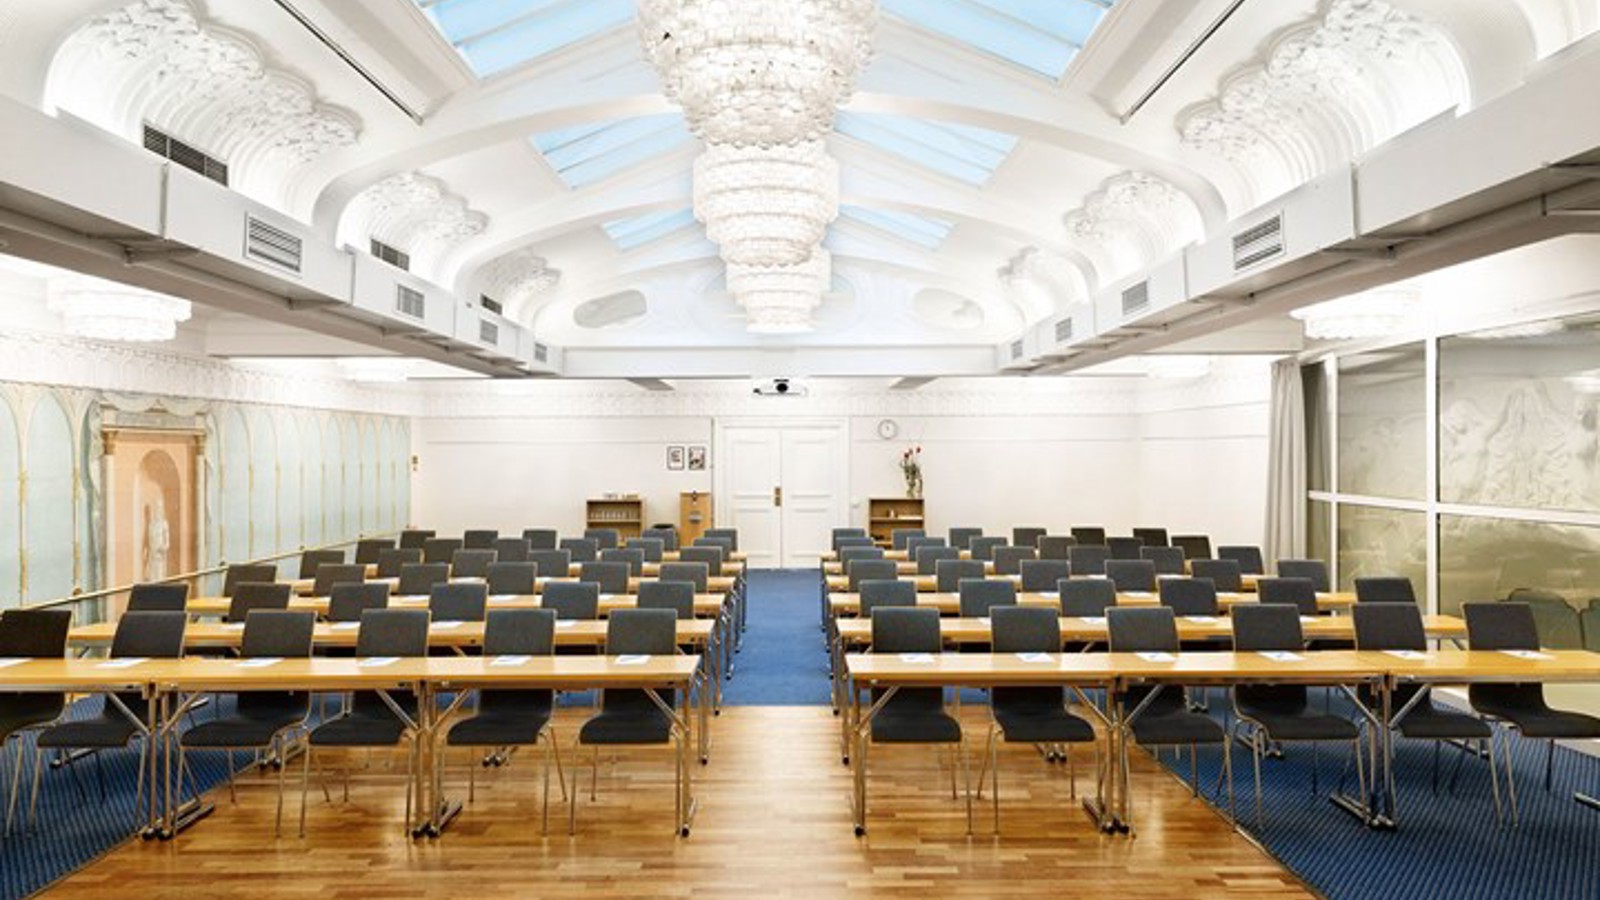 Large conference room with lined up chairs, skylights and white walls